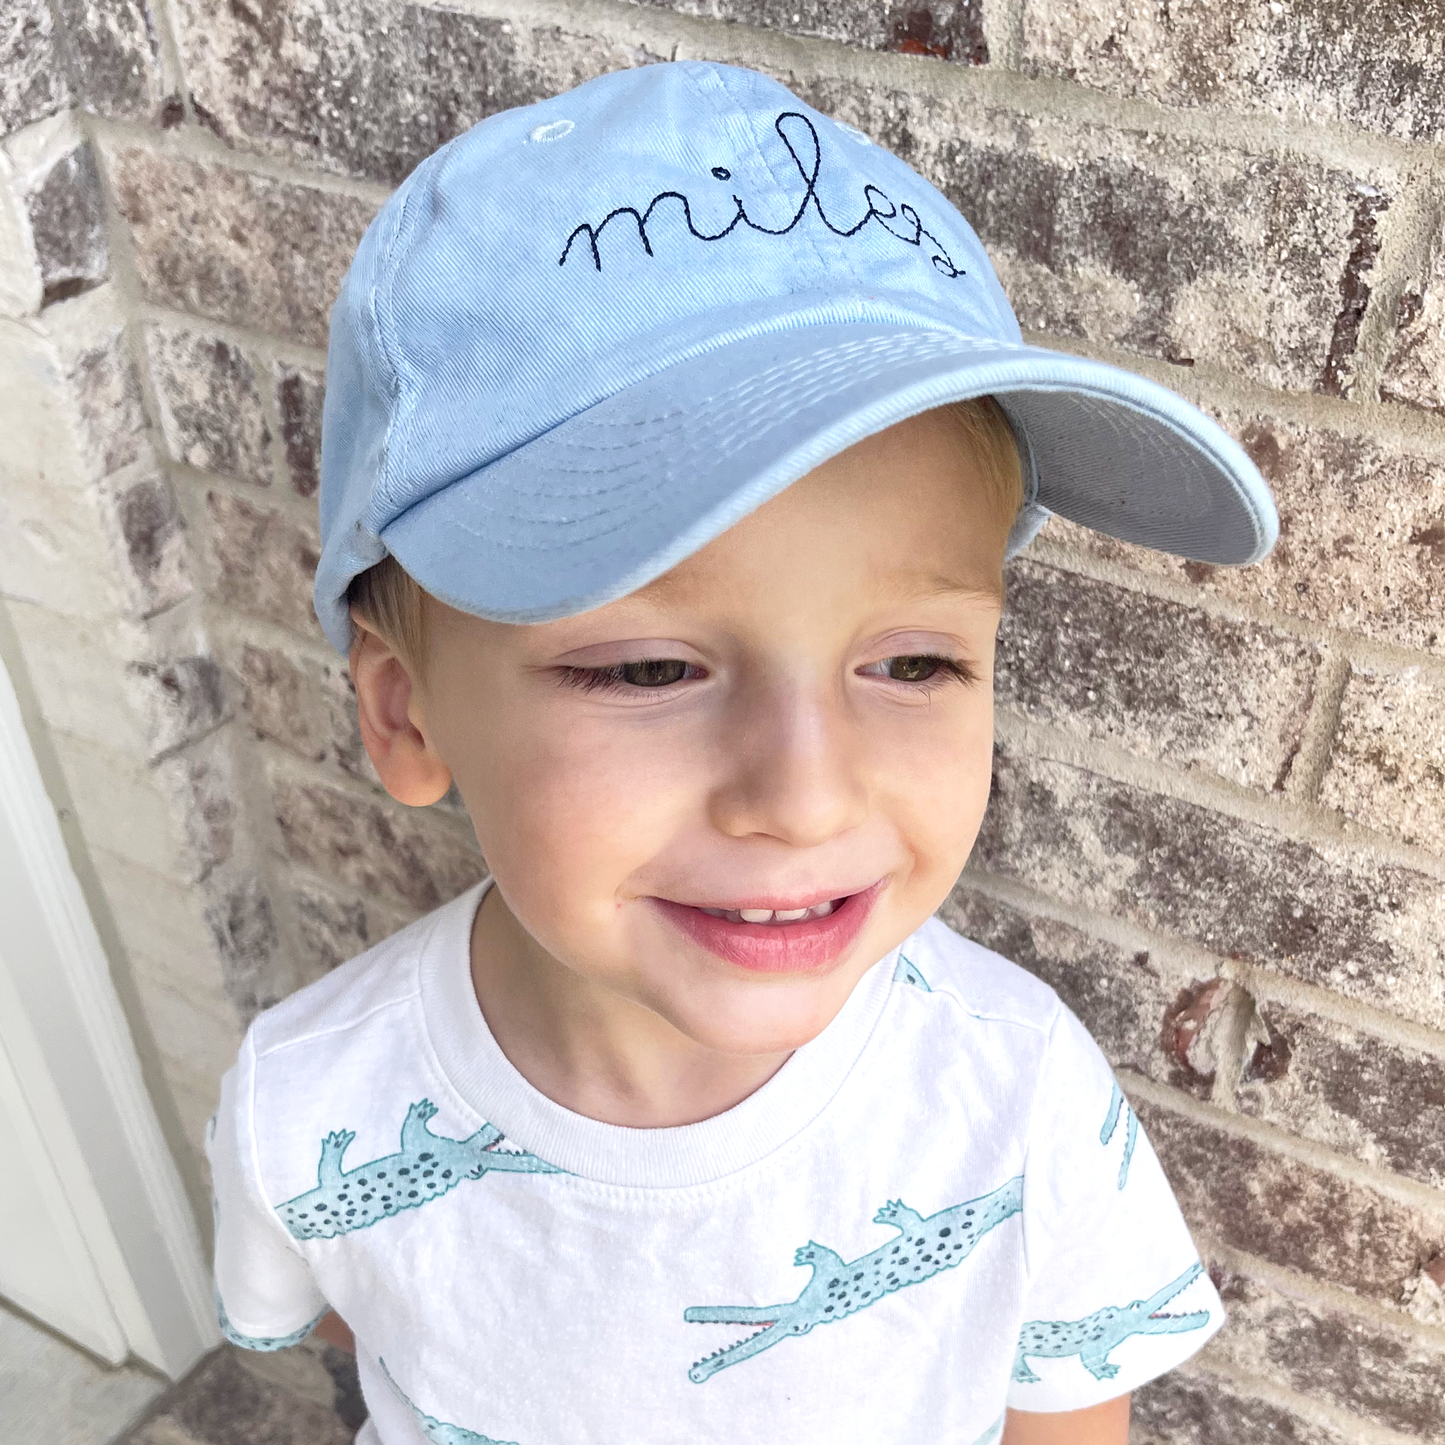 little boy wearing a baby blue youth baseball cap with embroidered name in a stitched cursive font and navy thread